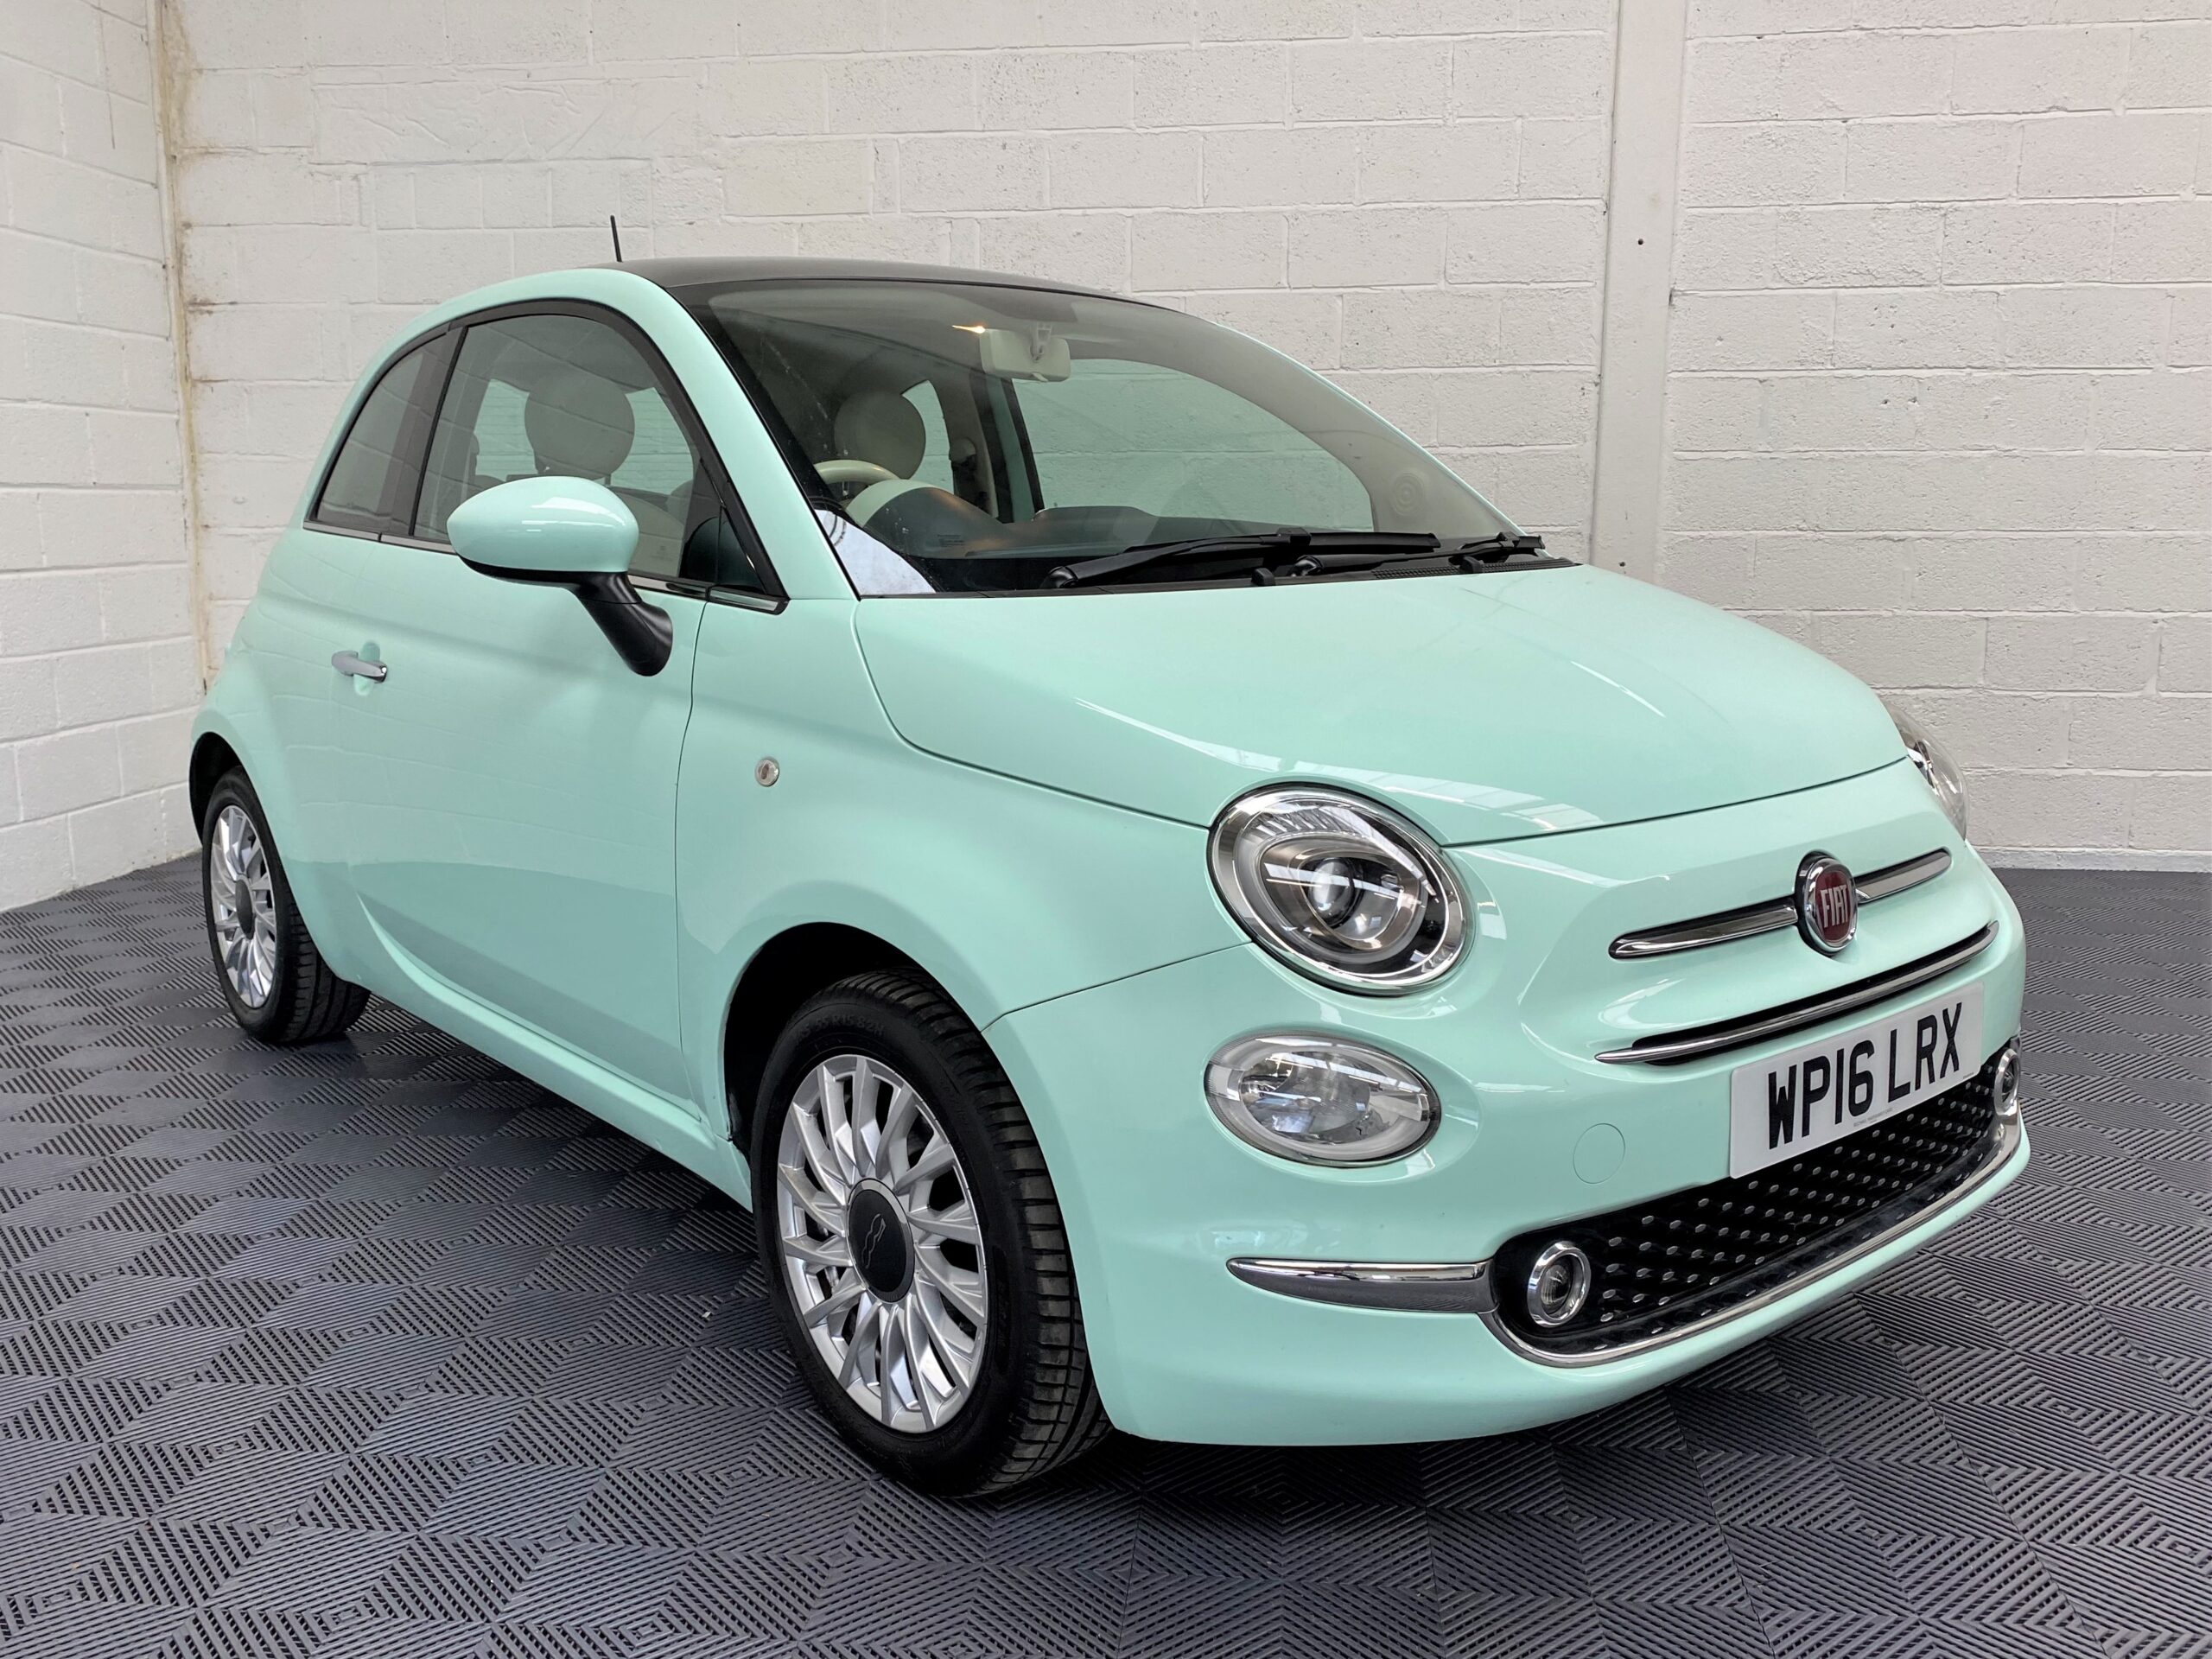 Fiat 500 Lounge in Smooth Mint Green For Sale at Michael Harraway Cars 1